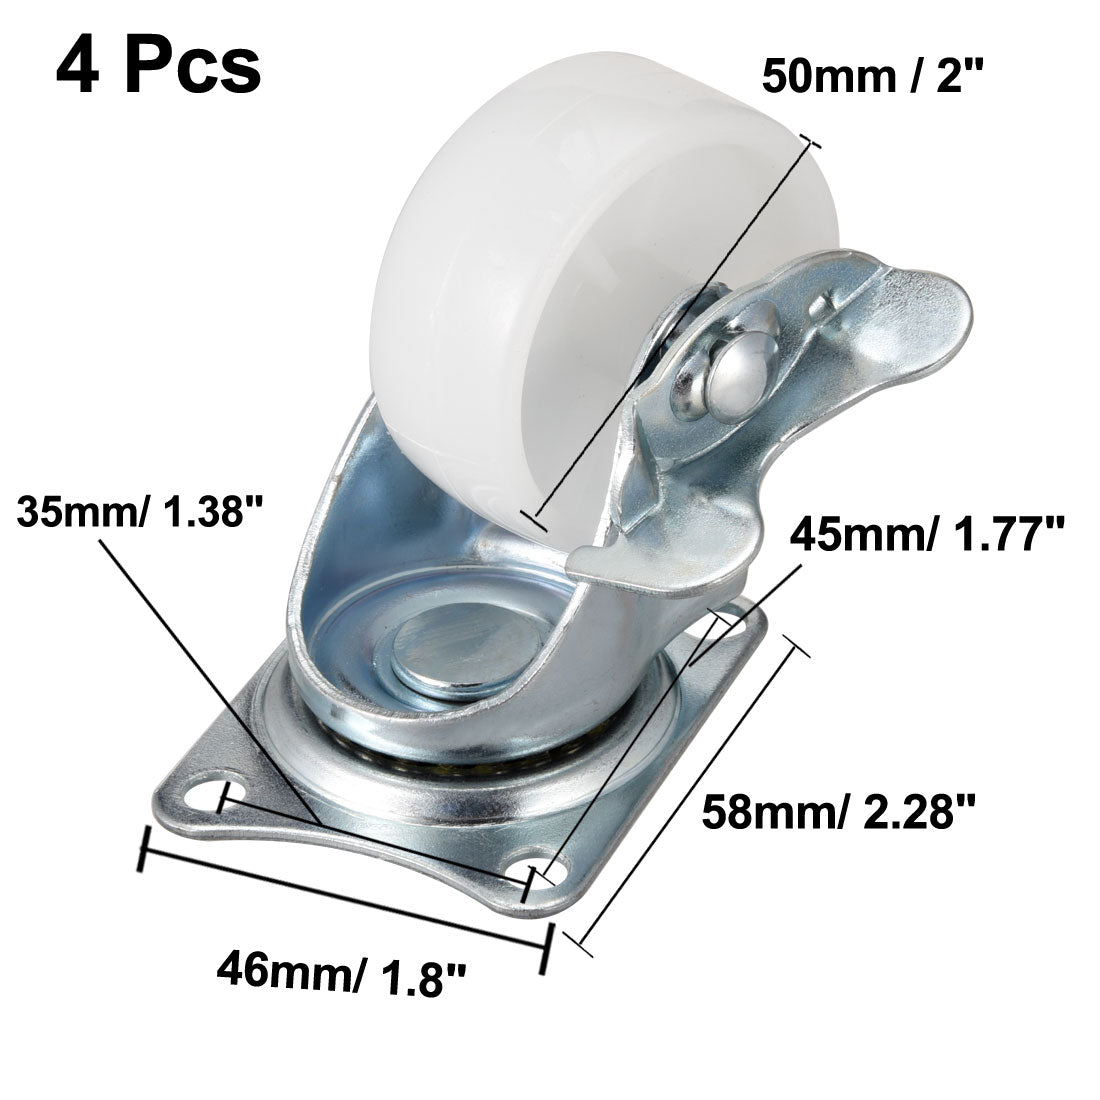 Uxcell Uxcell 2 Inch Swivel Caster Wheels PP 360 Degree Top Plate Mounted Caster Wheel with Brake 66lb Capacity 4 Pcs